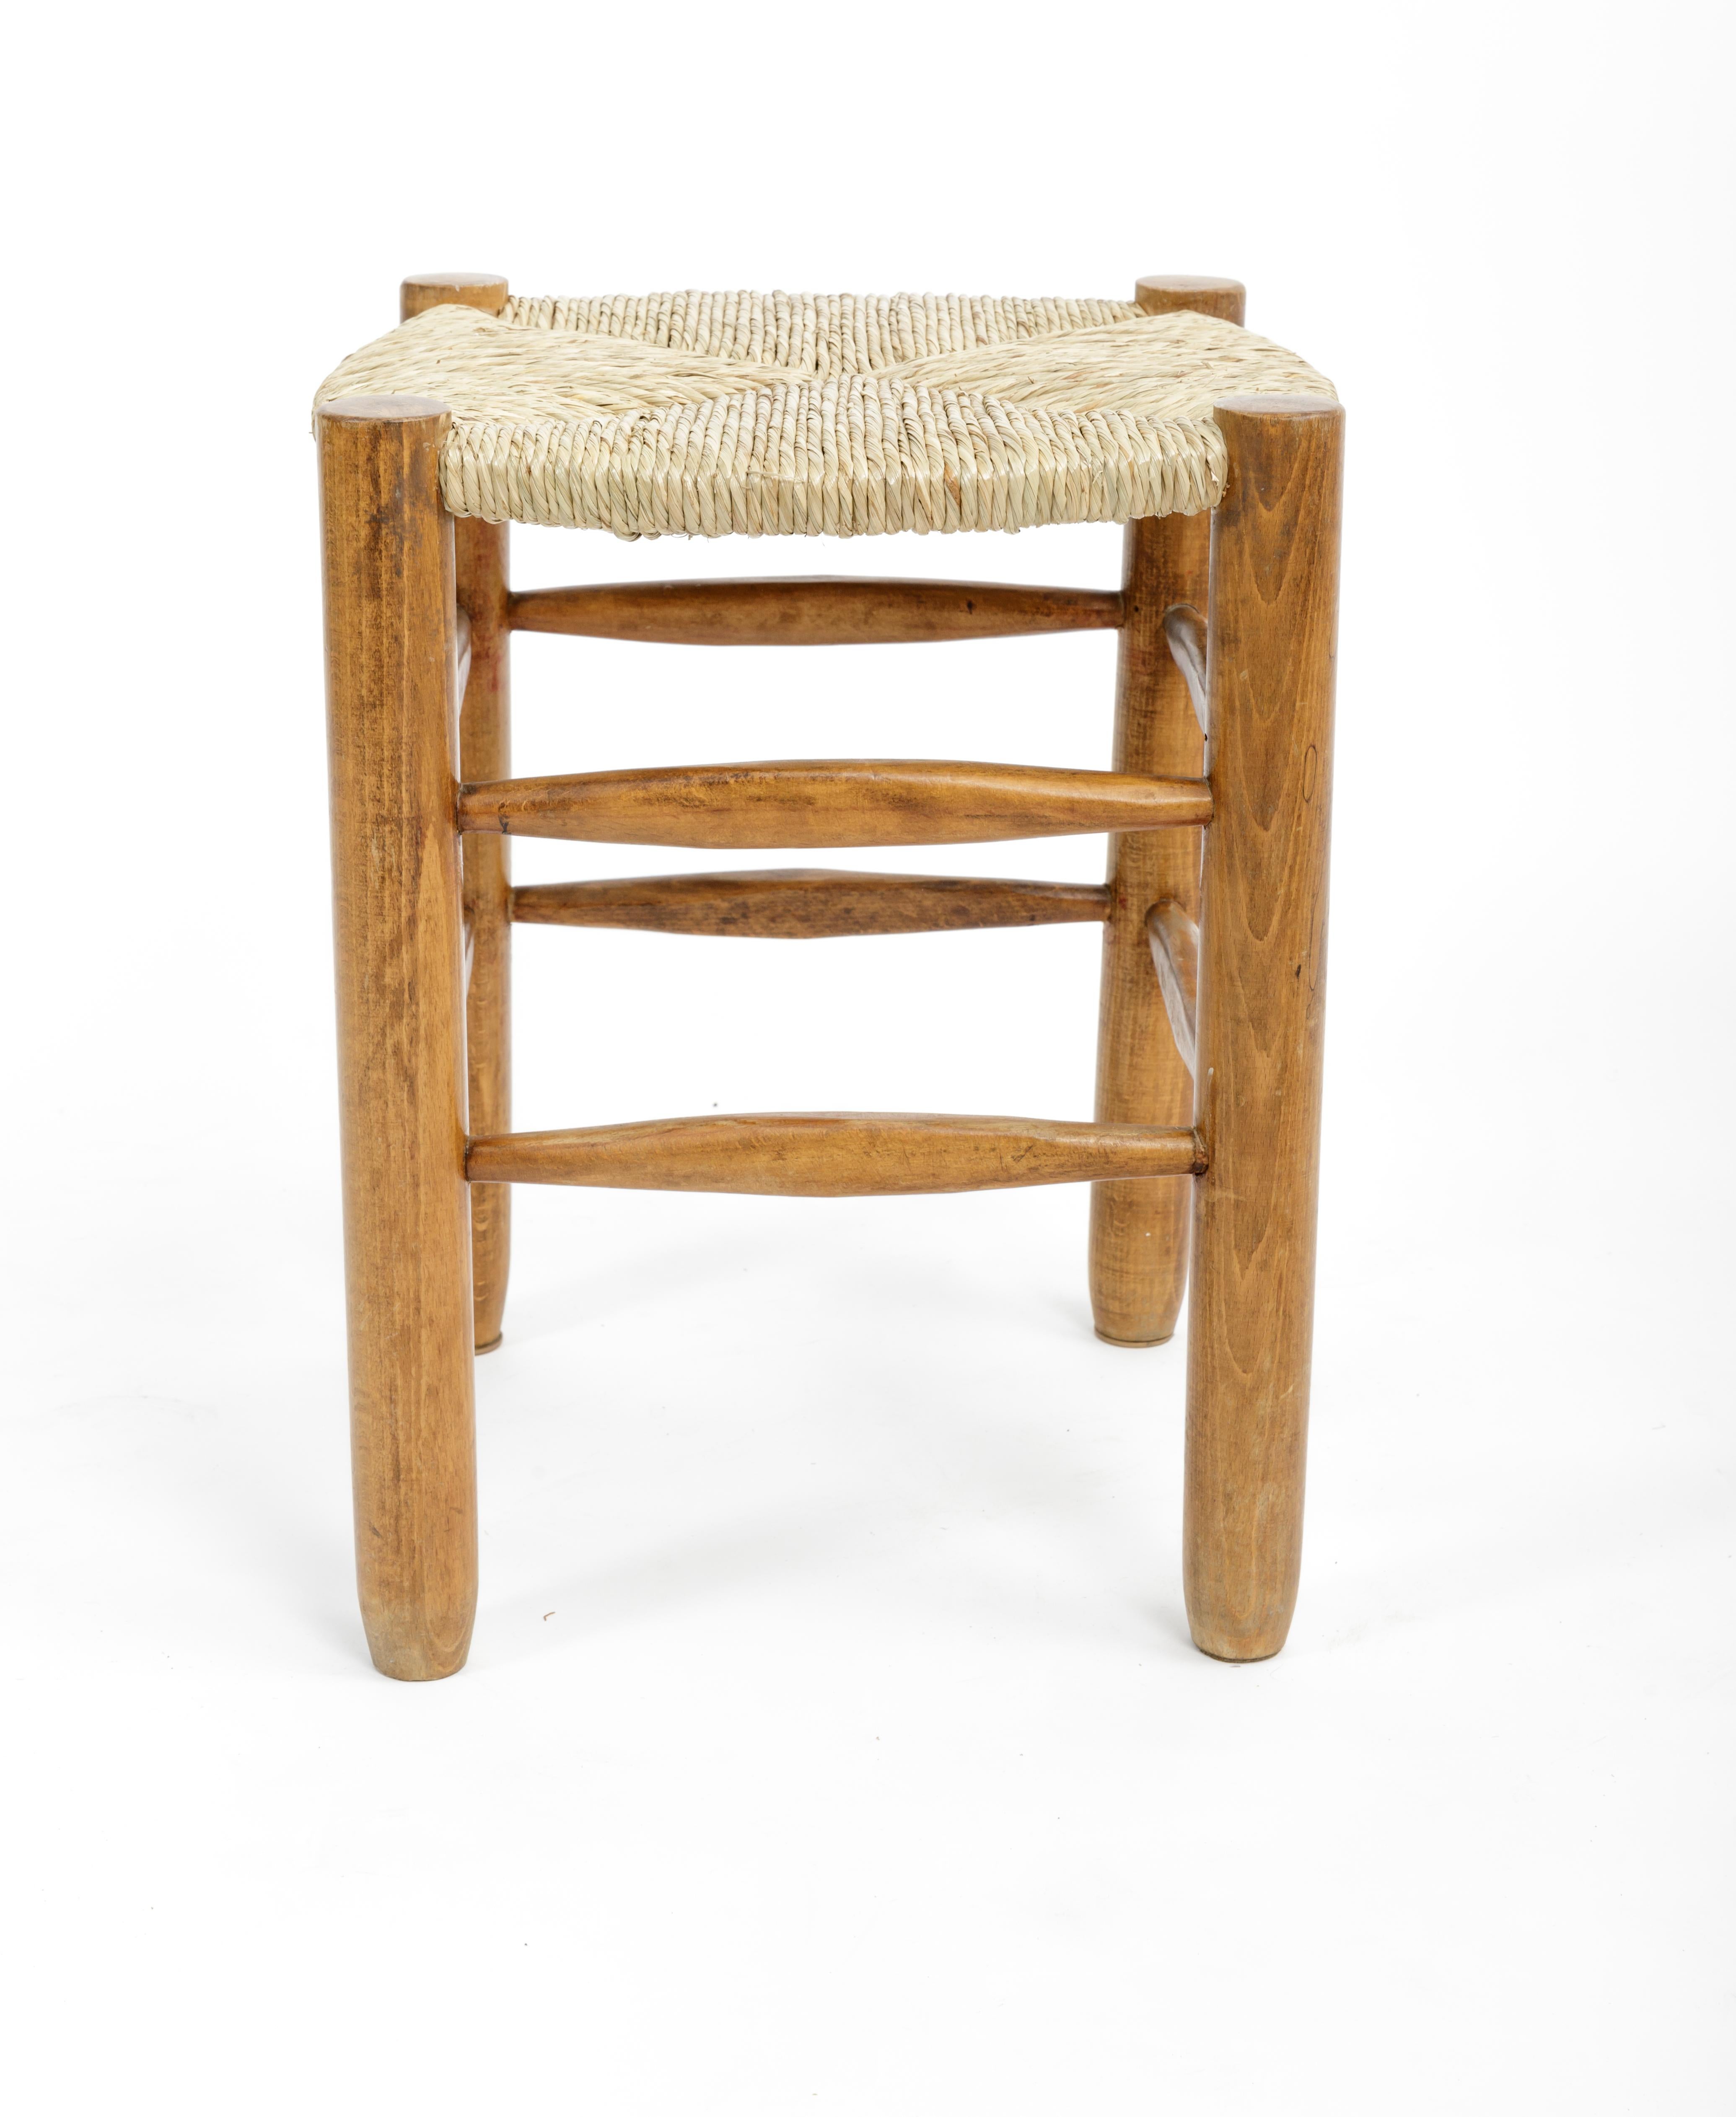 Woven Rush Stool in the Style of Charlotte Perriand, France, circa 1960s